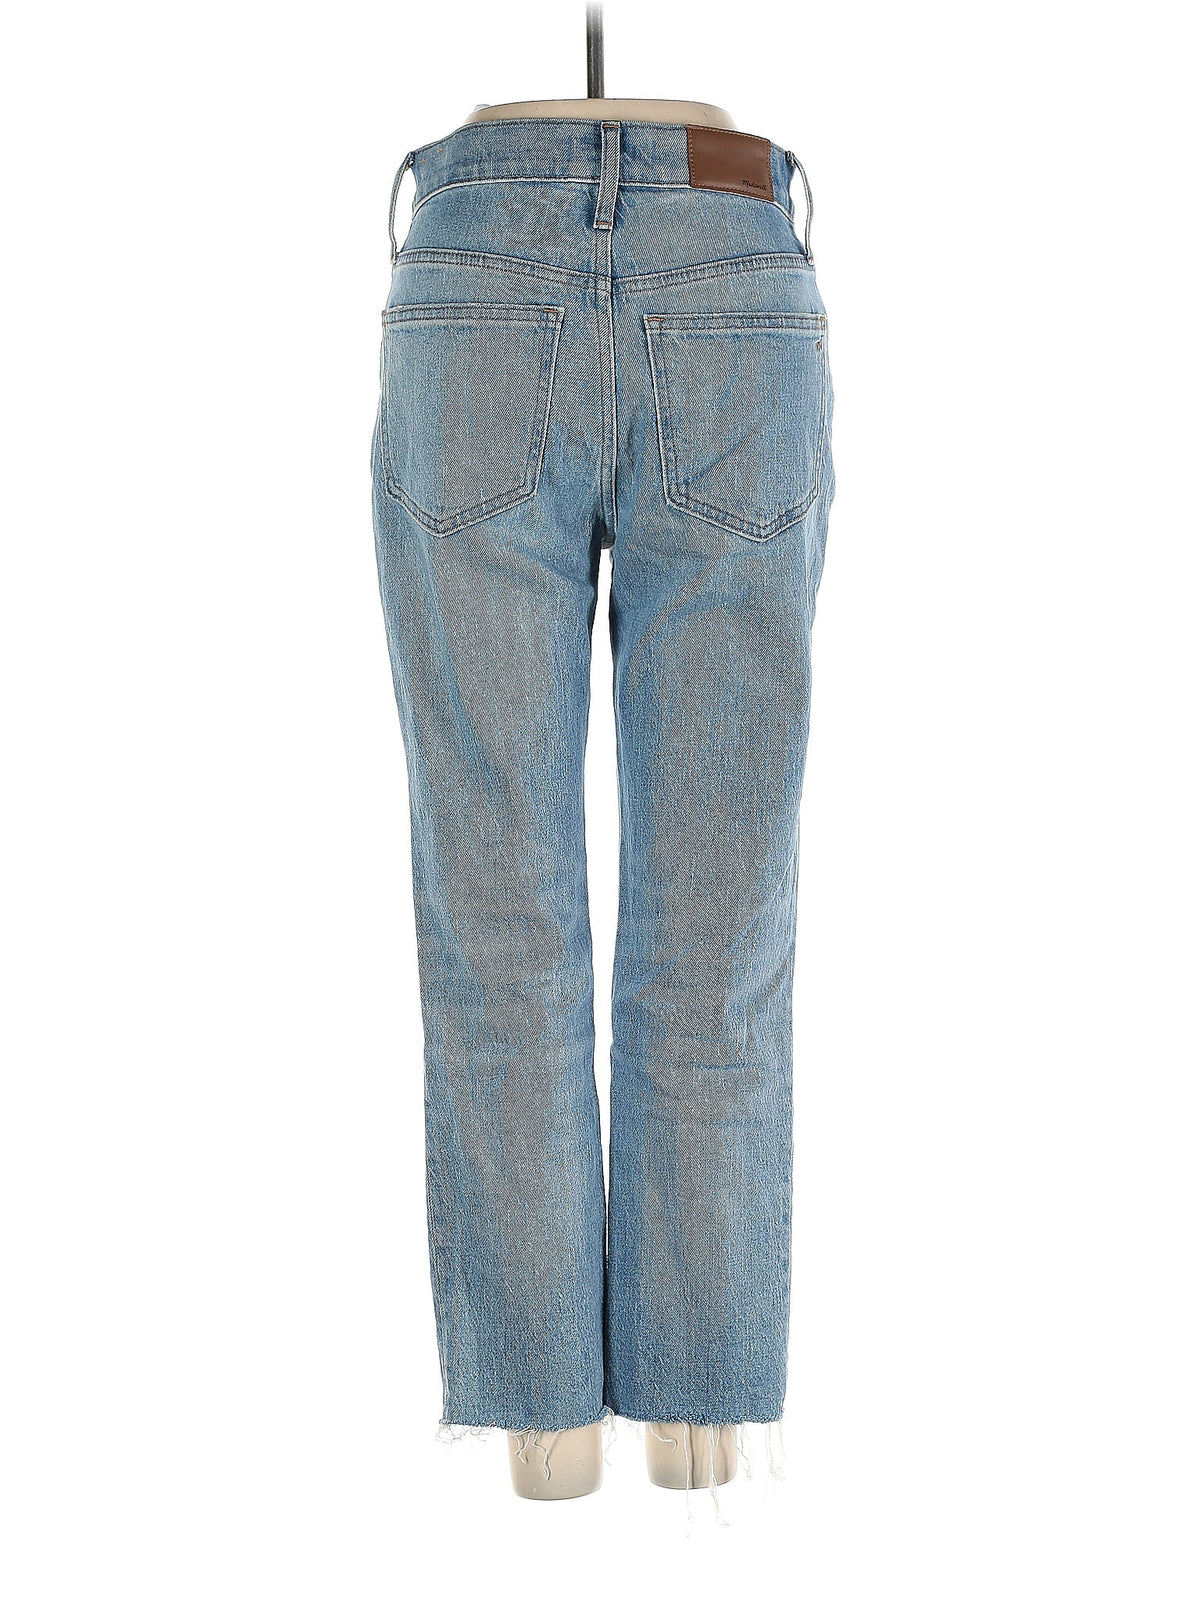 Mid-Rise Straight-leg Jeans in Light Wash waist size - 25 P